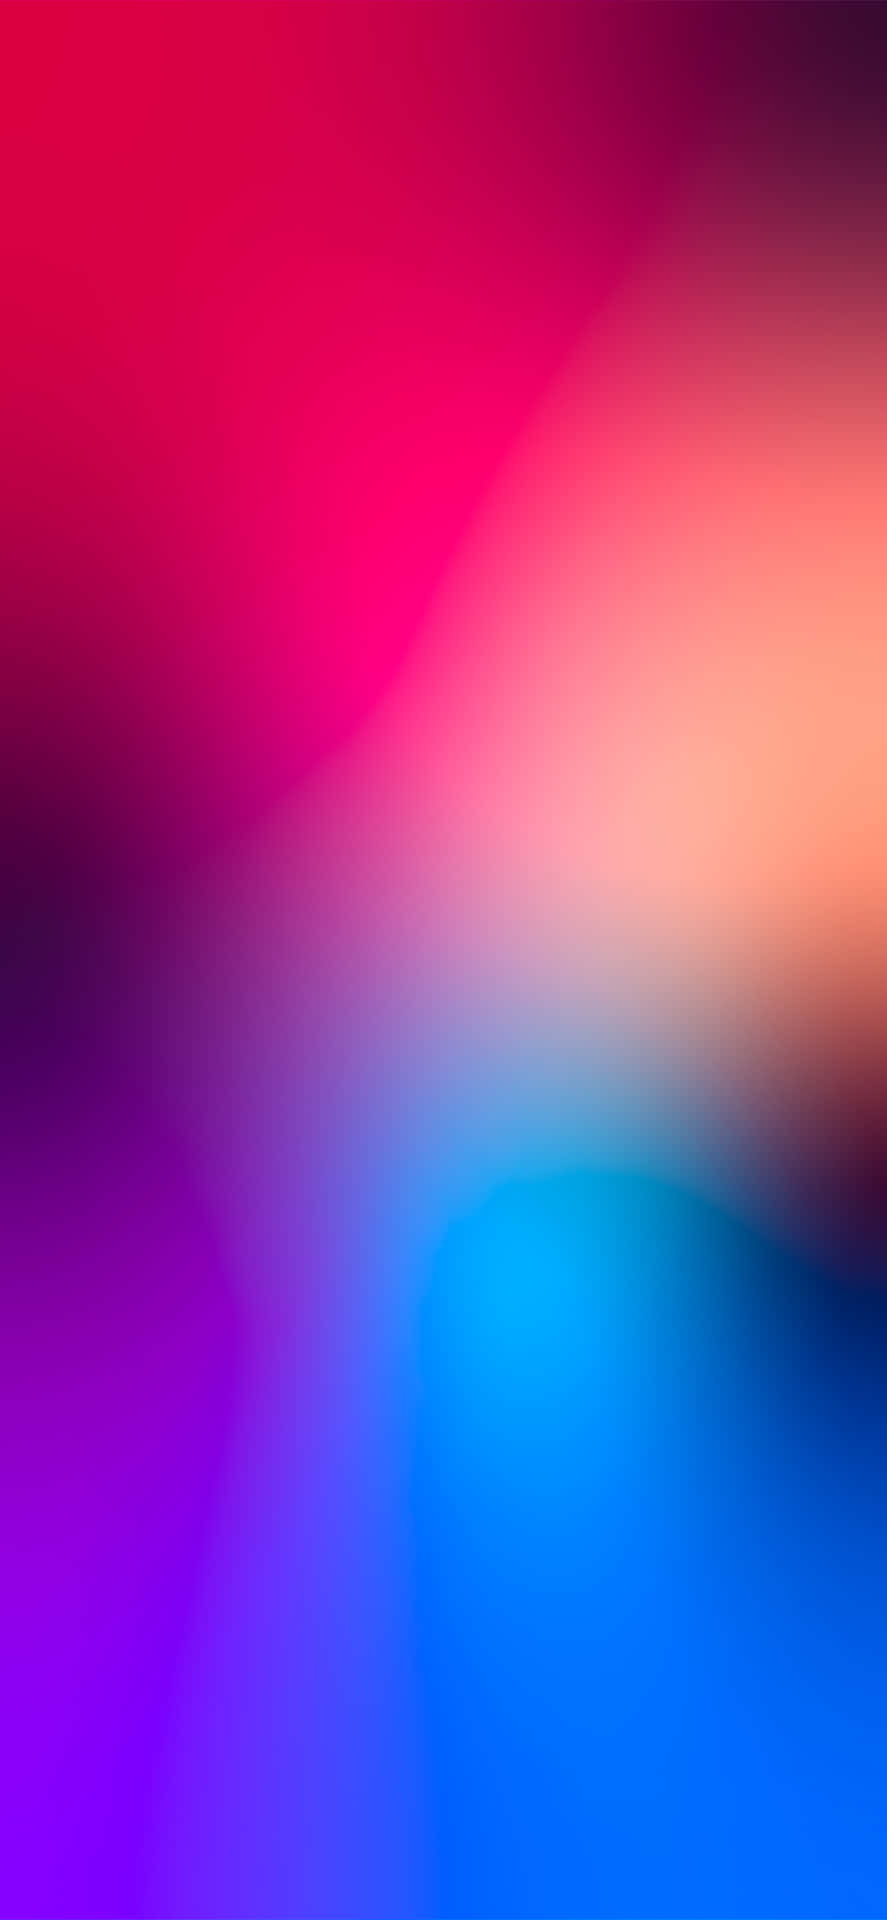 Download a blurred background with a pink, blue, and purple color ...